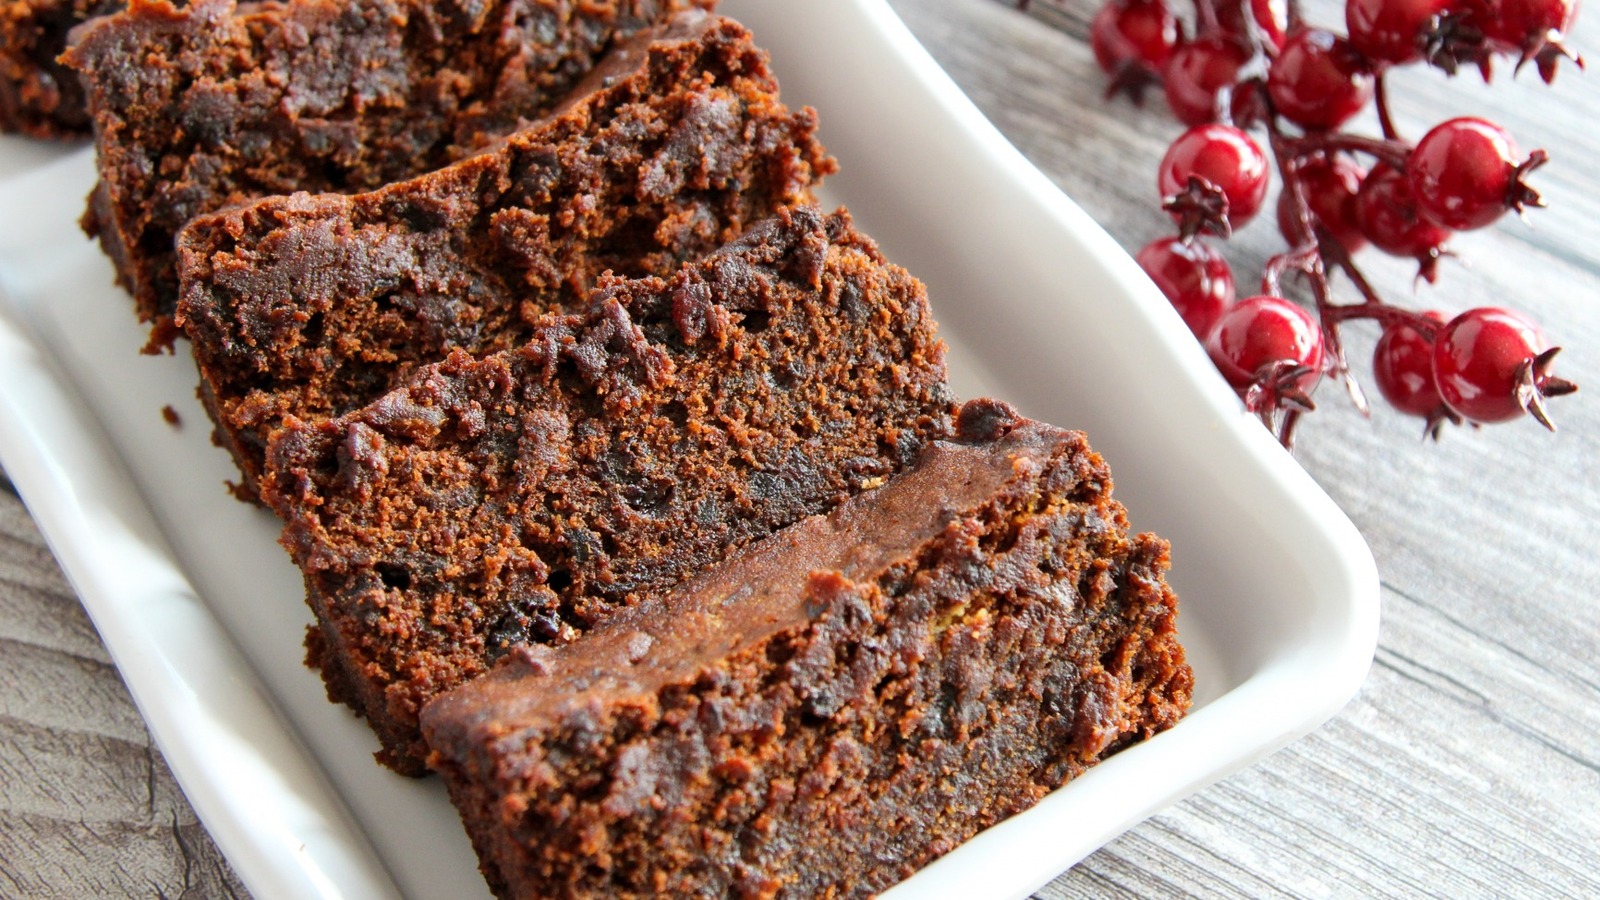 Indian Christmas Cake or The Rich Fruitcake